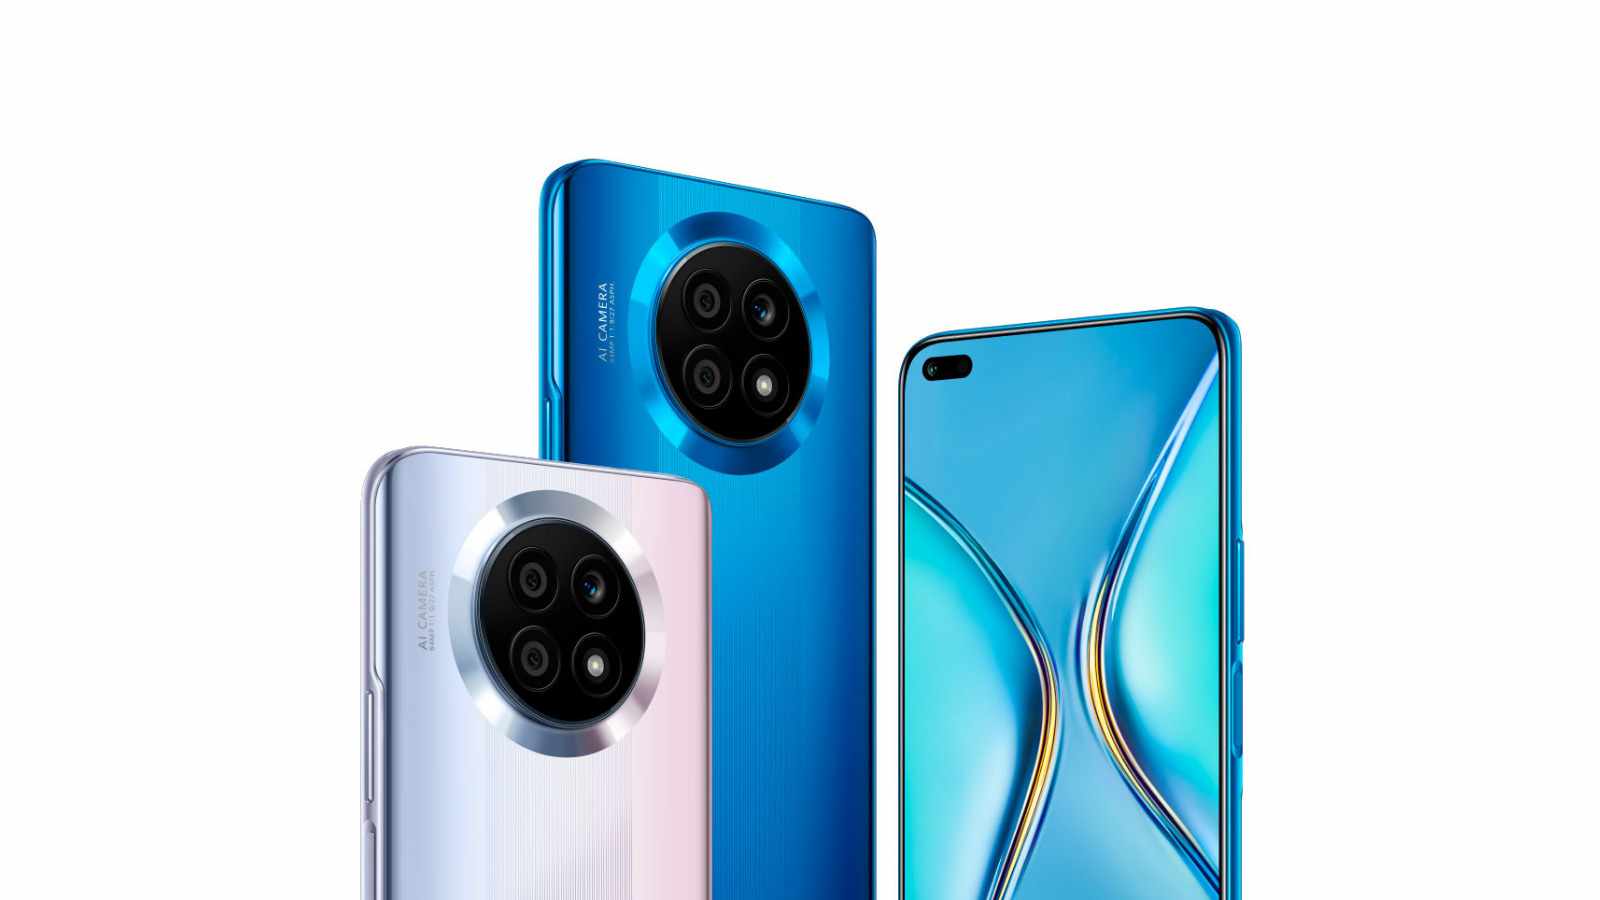 Honor X20 5G launched with MediaTek Dimensity 900, 64MP triple rear camera: Price, Specifications